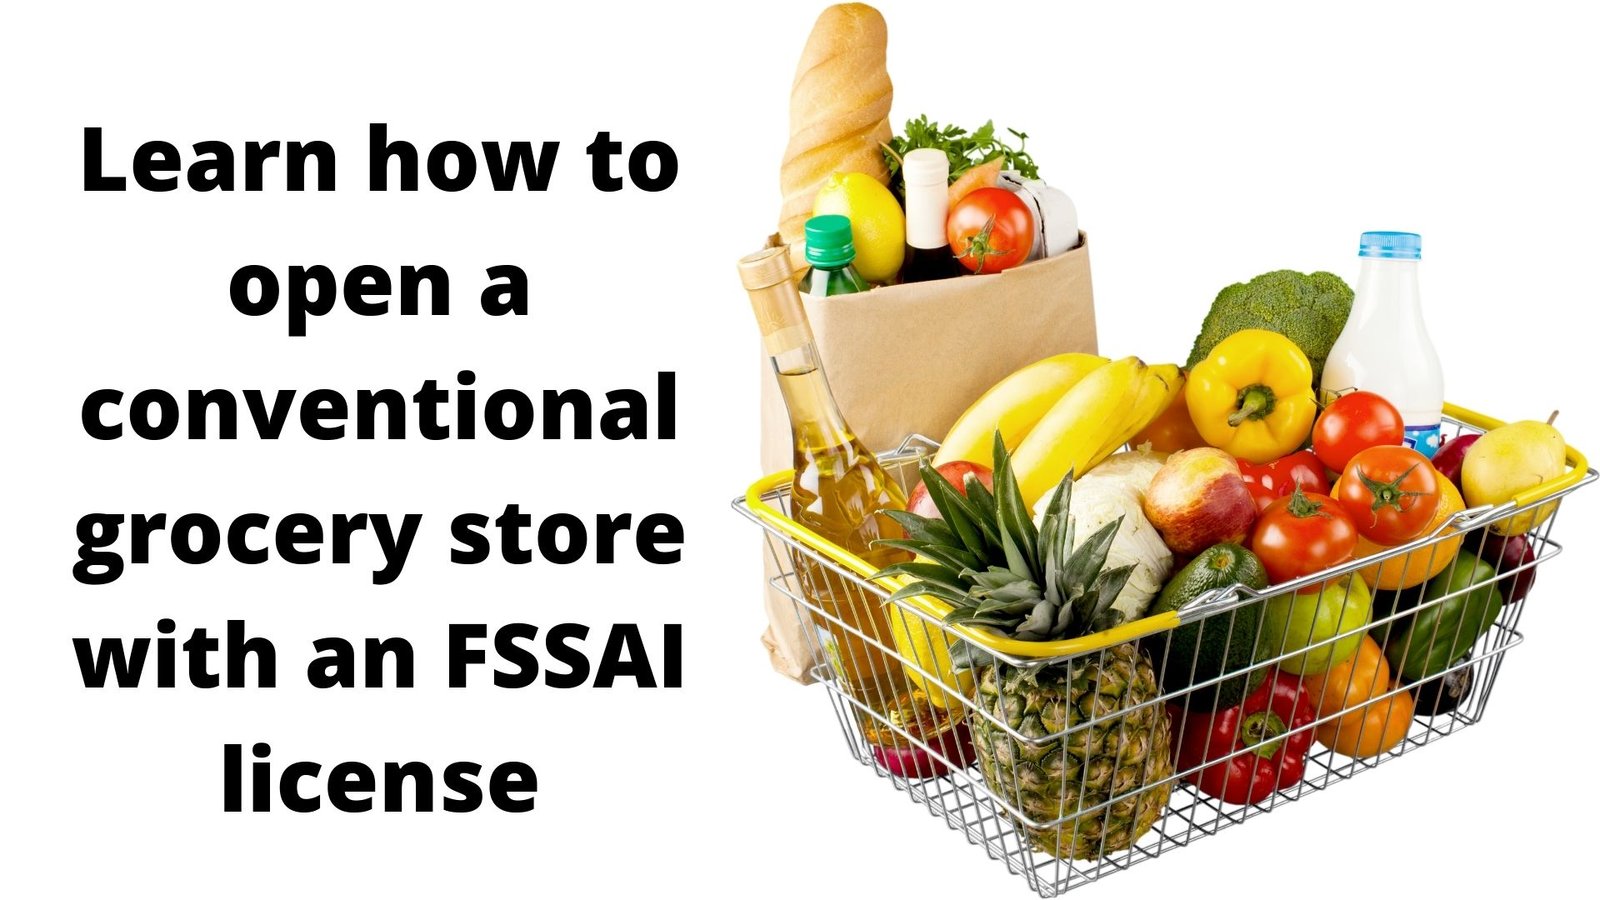 Learn how to open a conventional grocery store with an FSSAI license